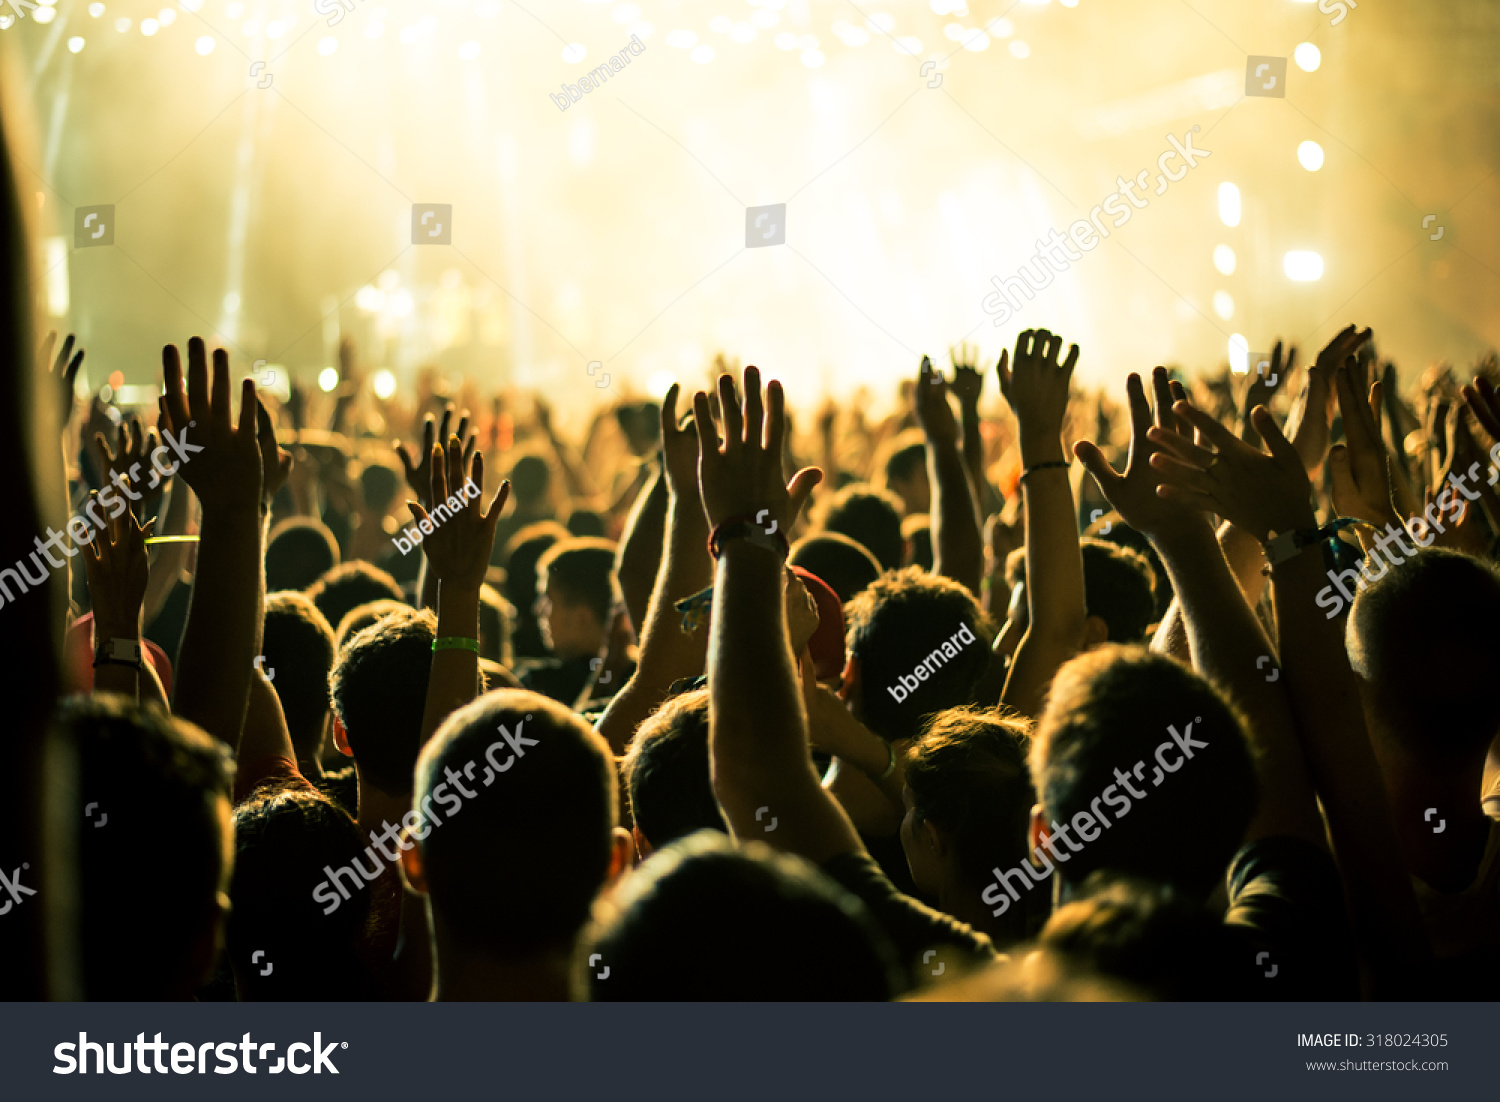 Audience with hands raised at a music festival and lights streaming down from above the stage. Soft focus, blurred movement. #318024305